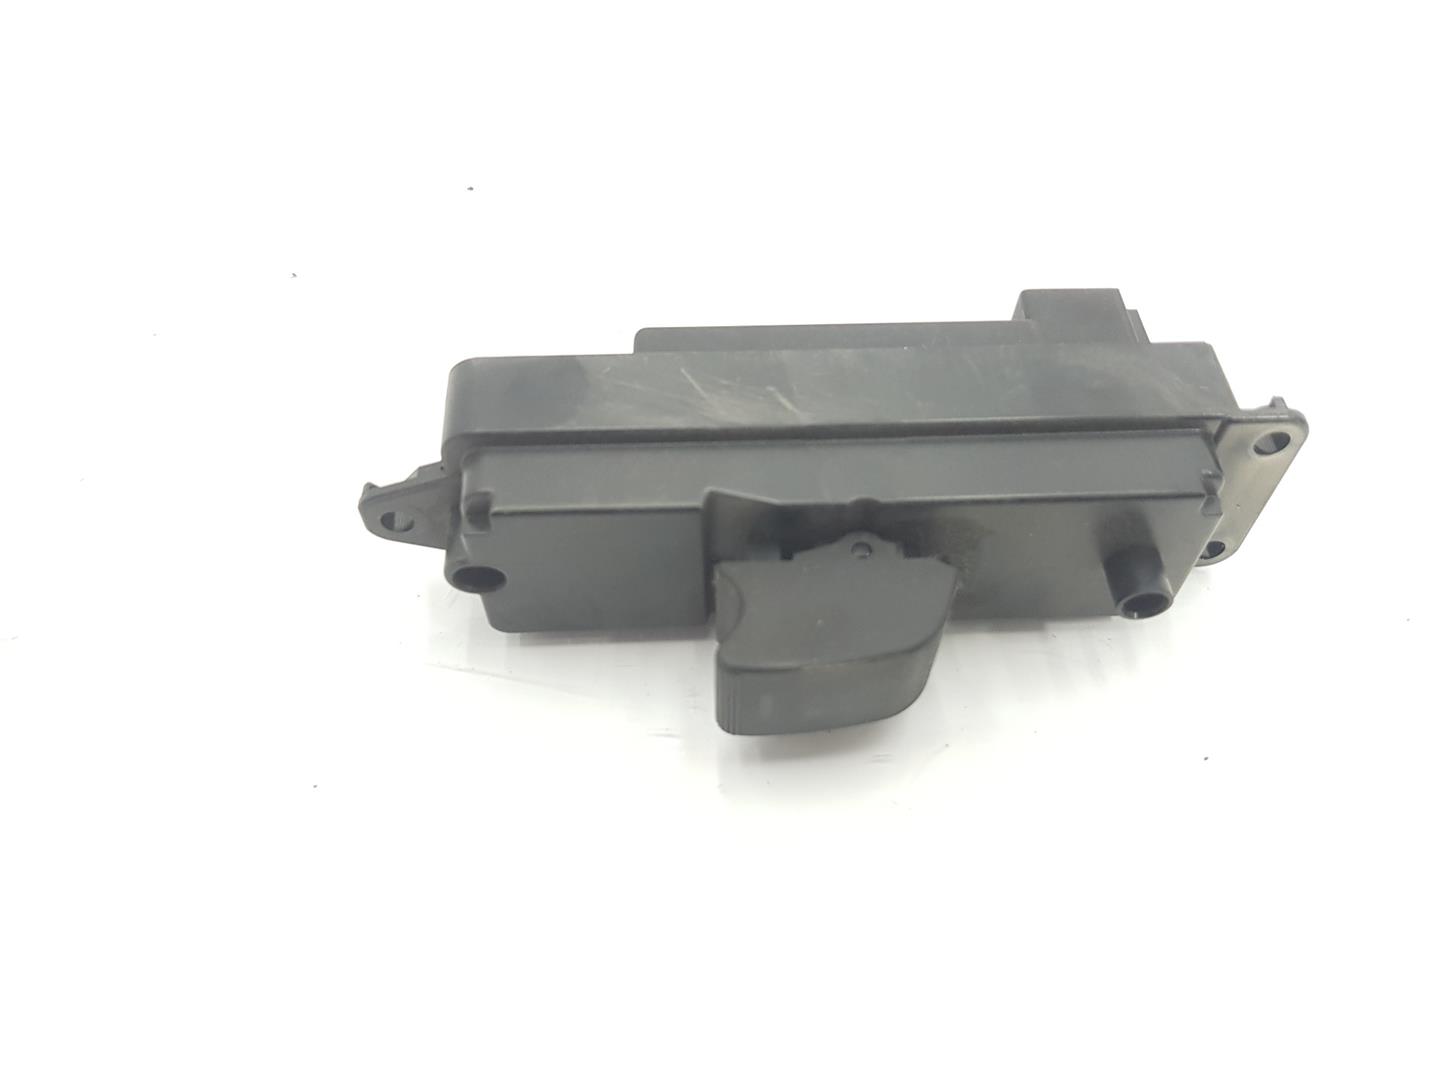 MAZDA 6 GH (2007-2013) Rear Right Door Window Control Switch GS1D66380, GS1D66380 19908800